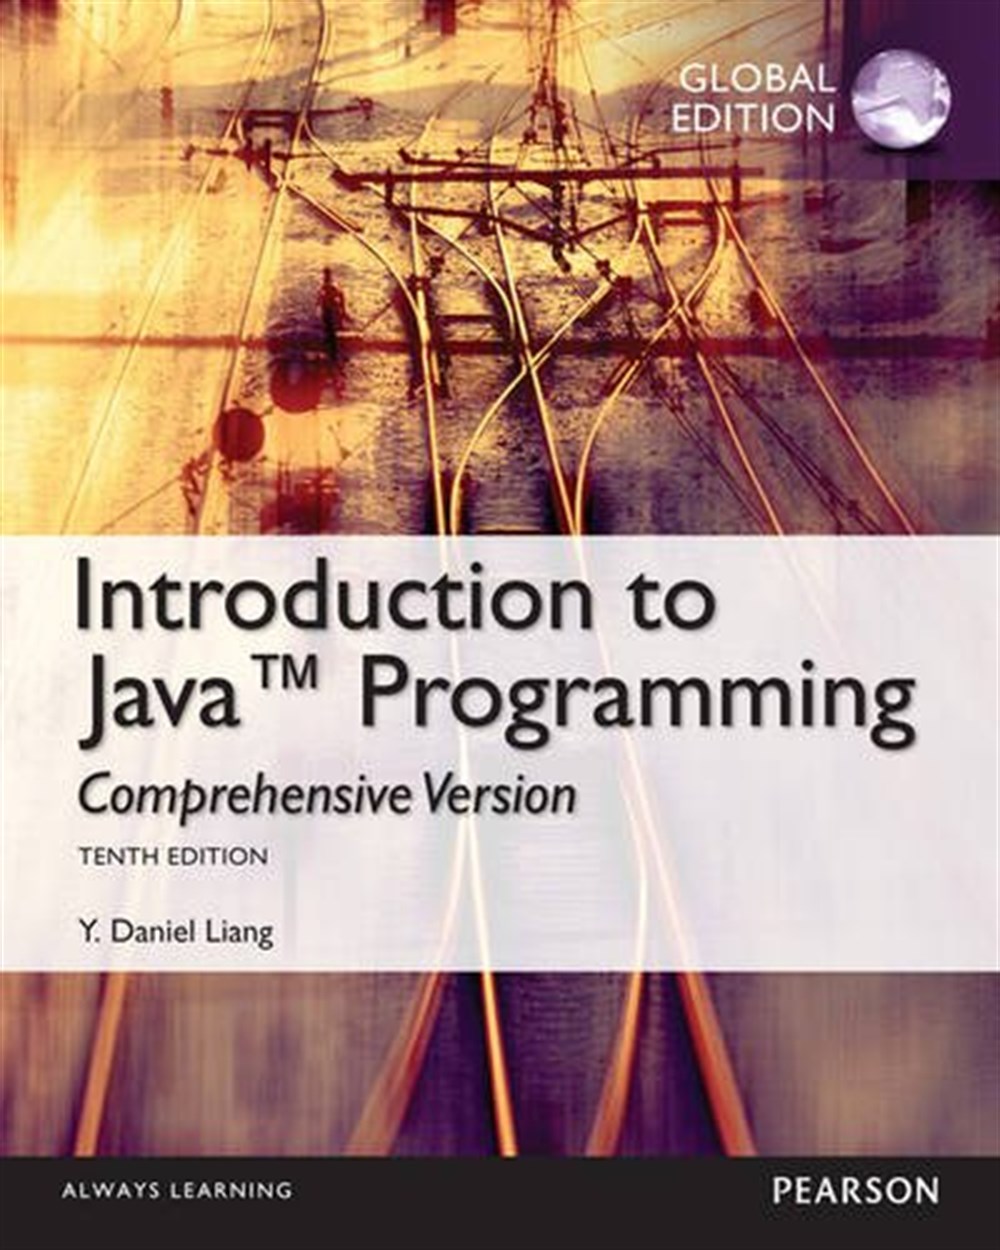 introduction to java programming assignments